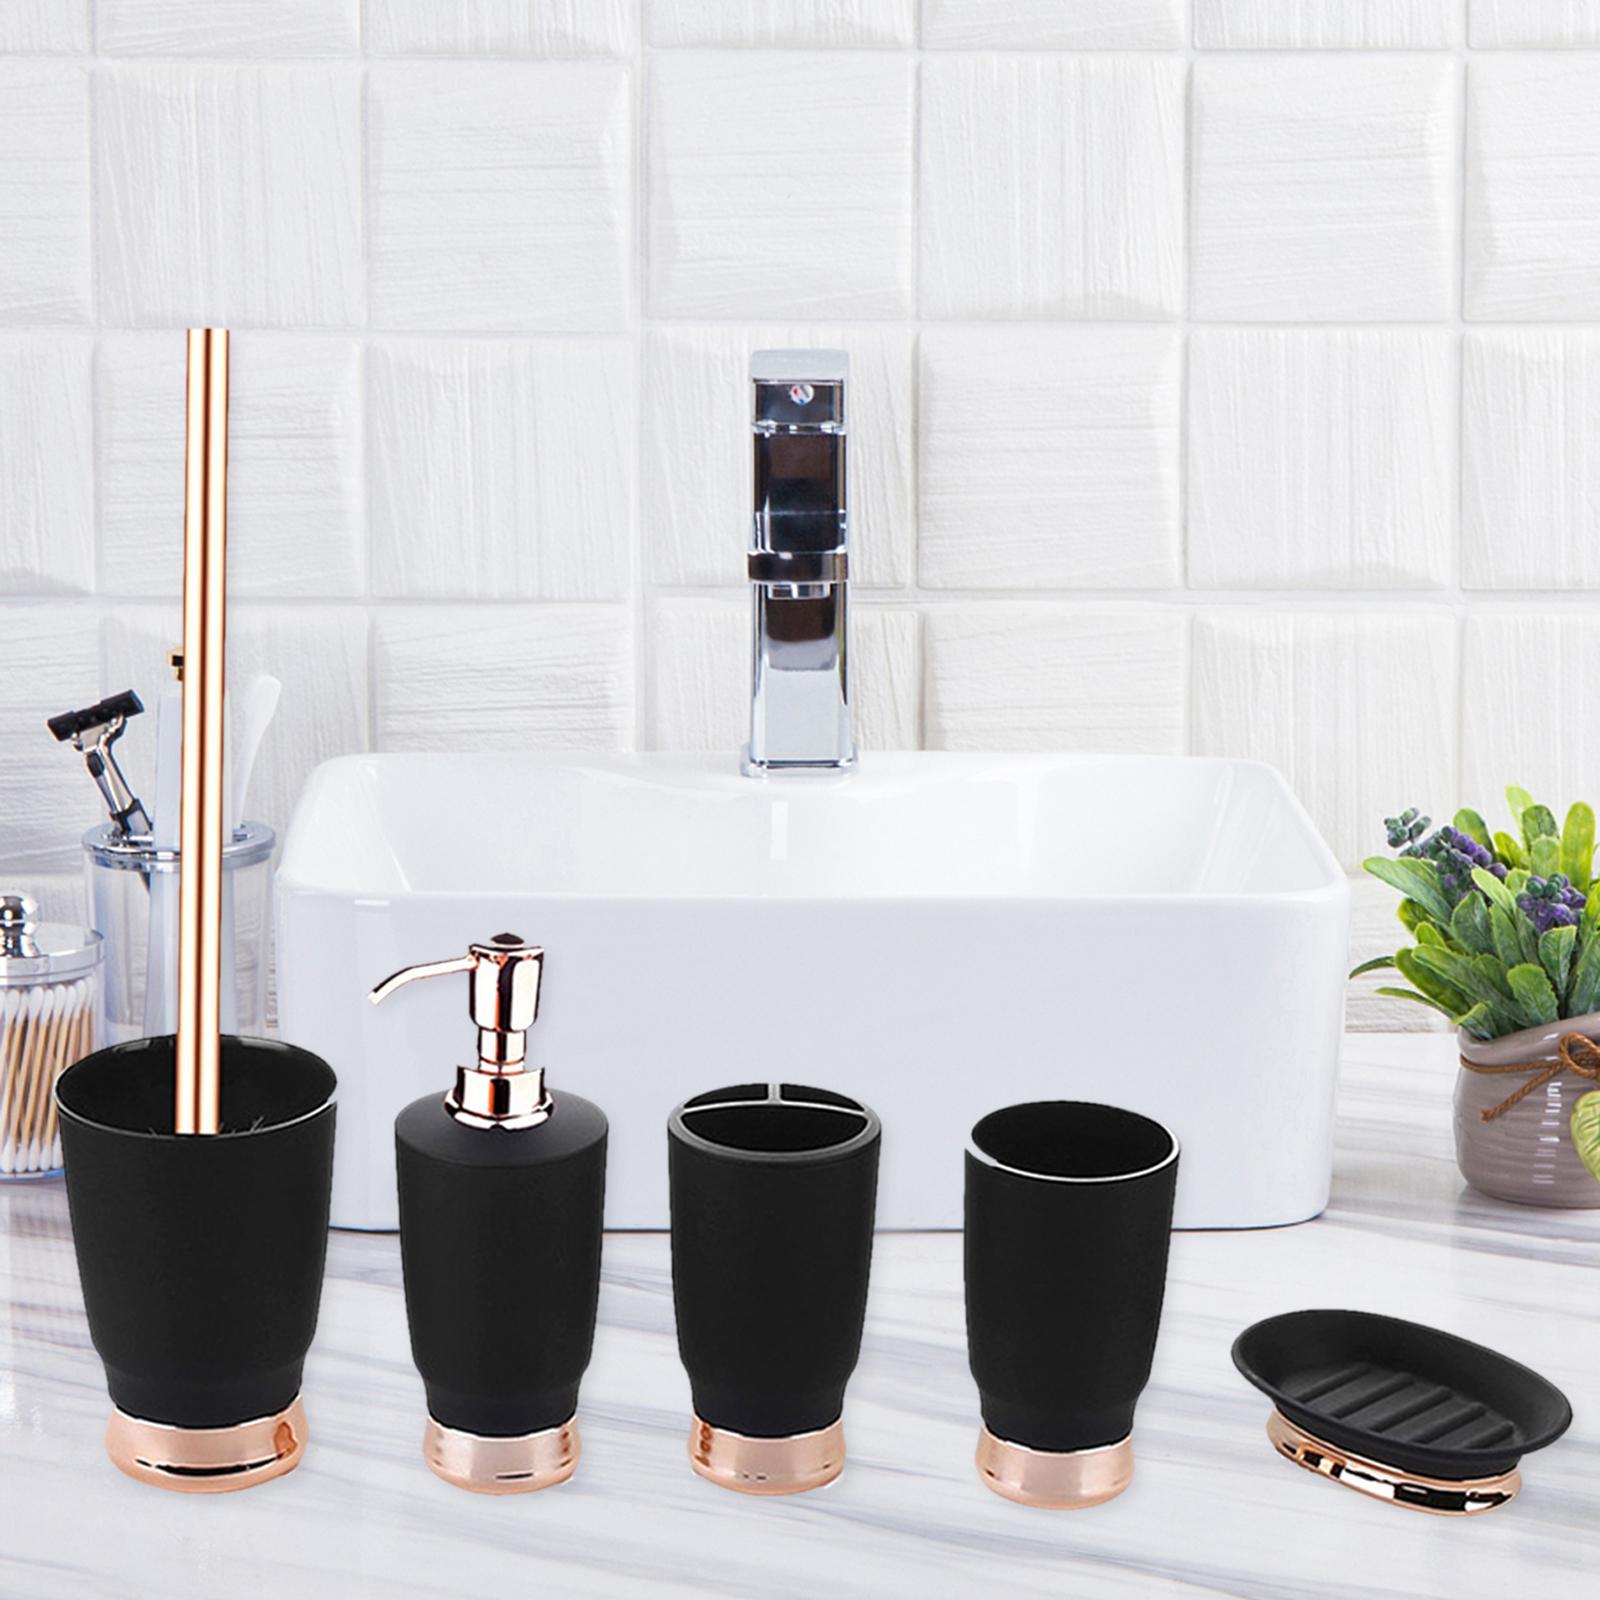 5x Bathroom Accessories Set Soap Toothbrush Holder for Apartment Home